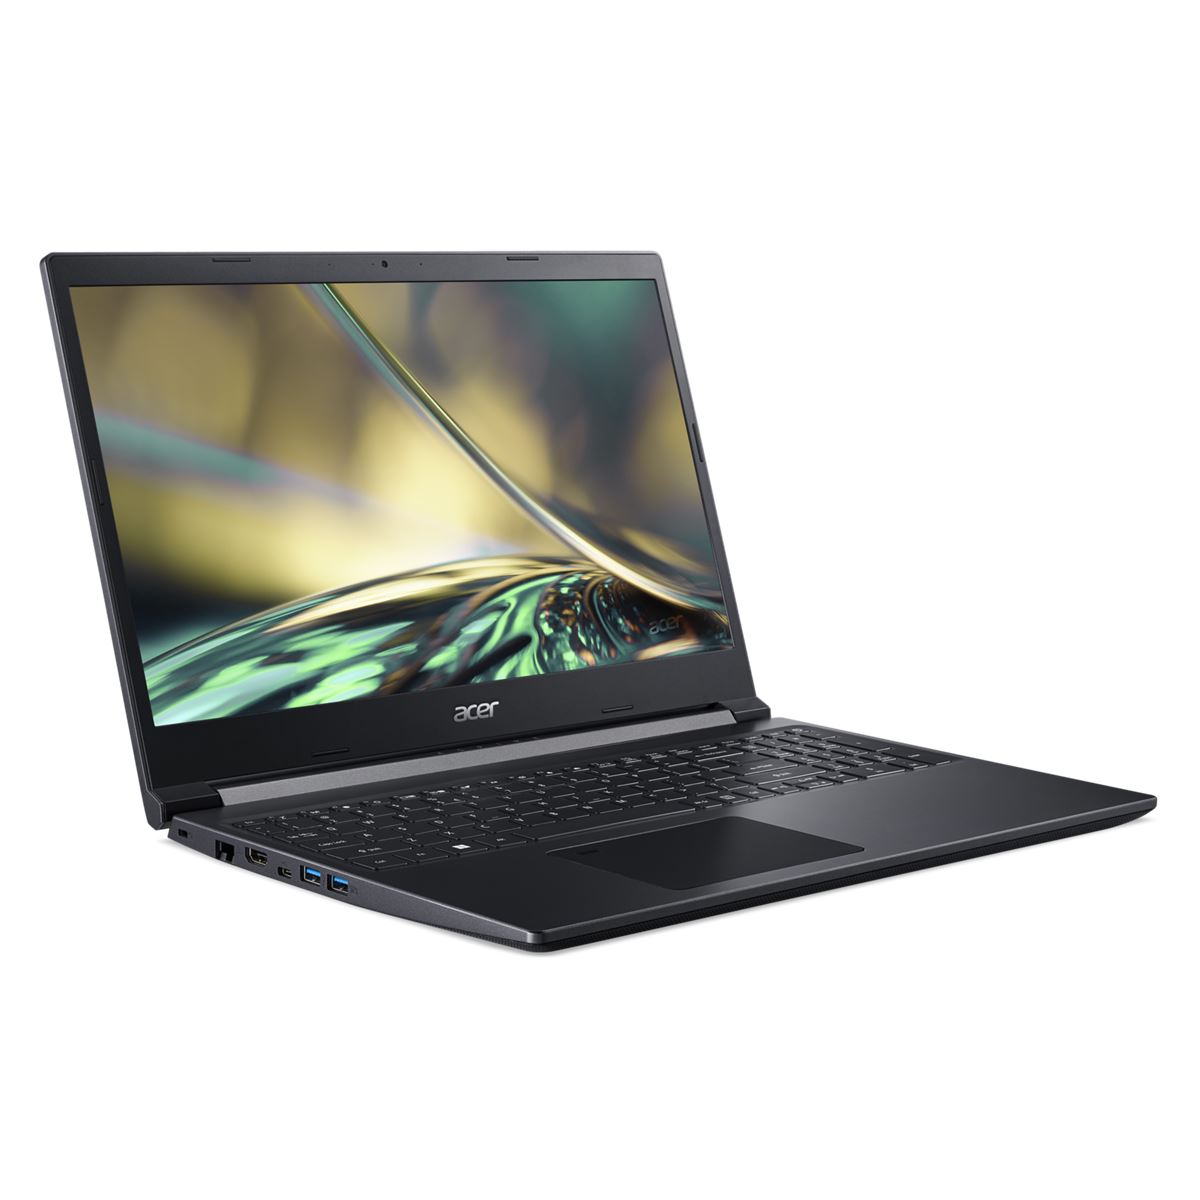 LAPTOP ACER A715 24/512GB